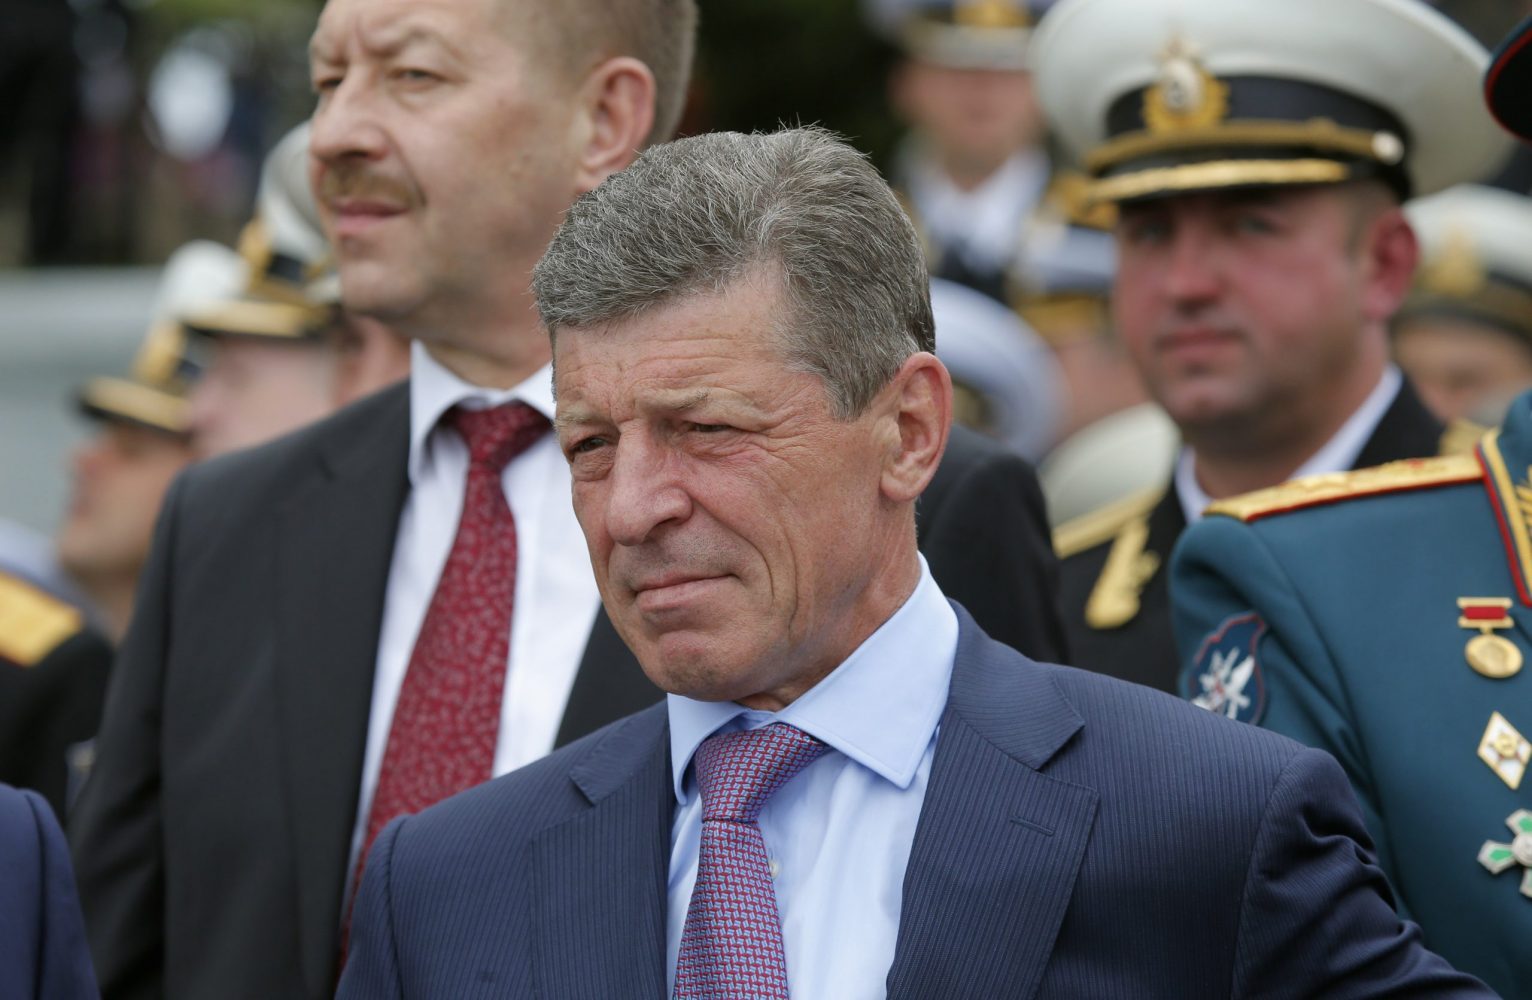 Pressuring Putin is the only way to end Ukraine’s pain